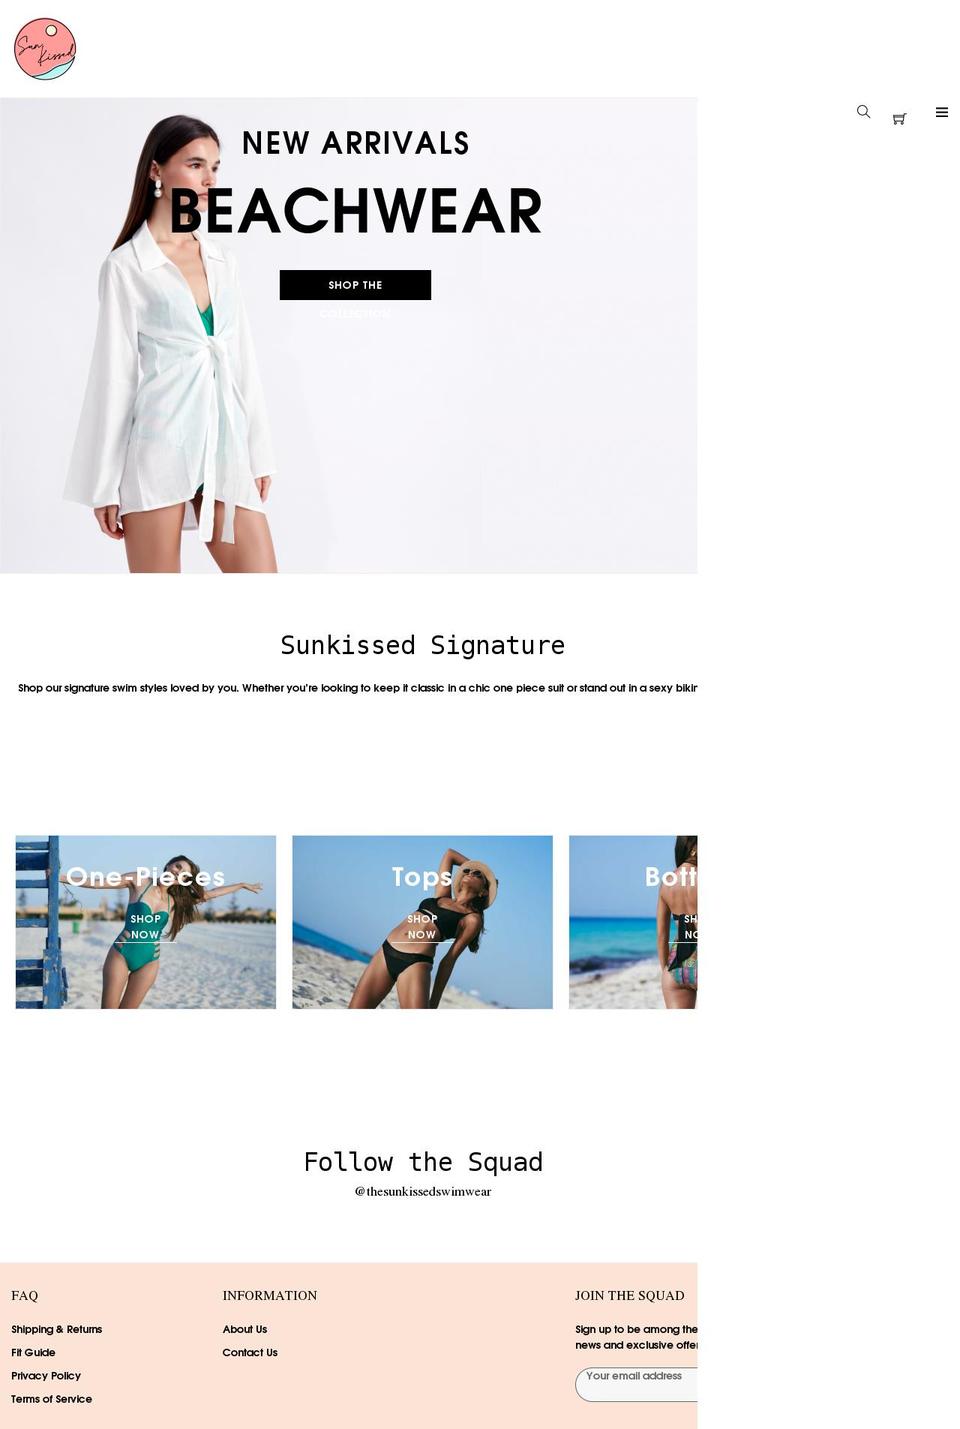 Amely Shopify theme site example theskshop.com